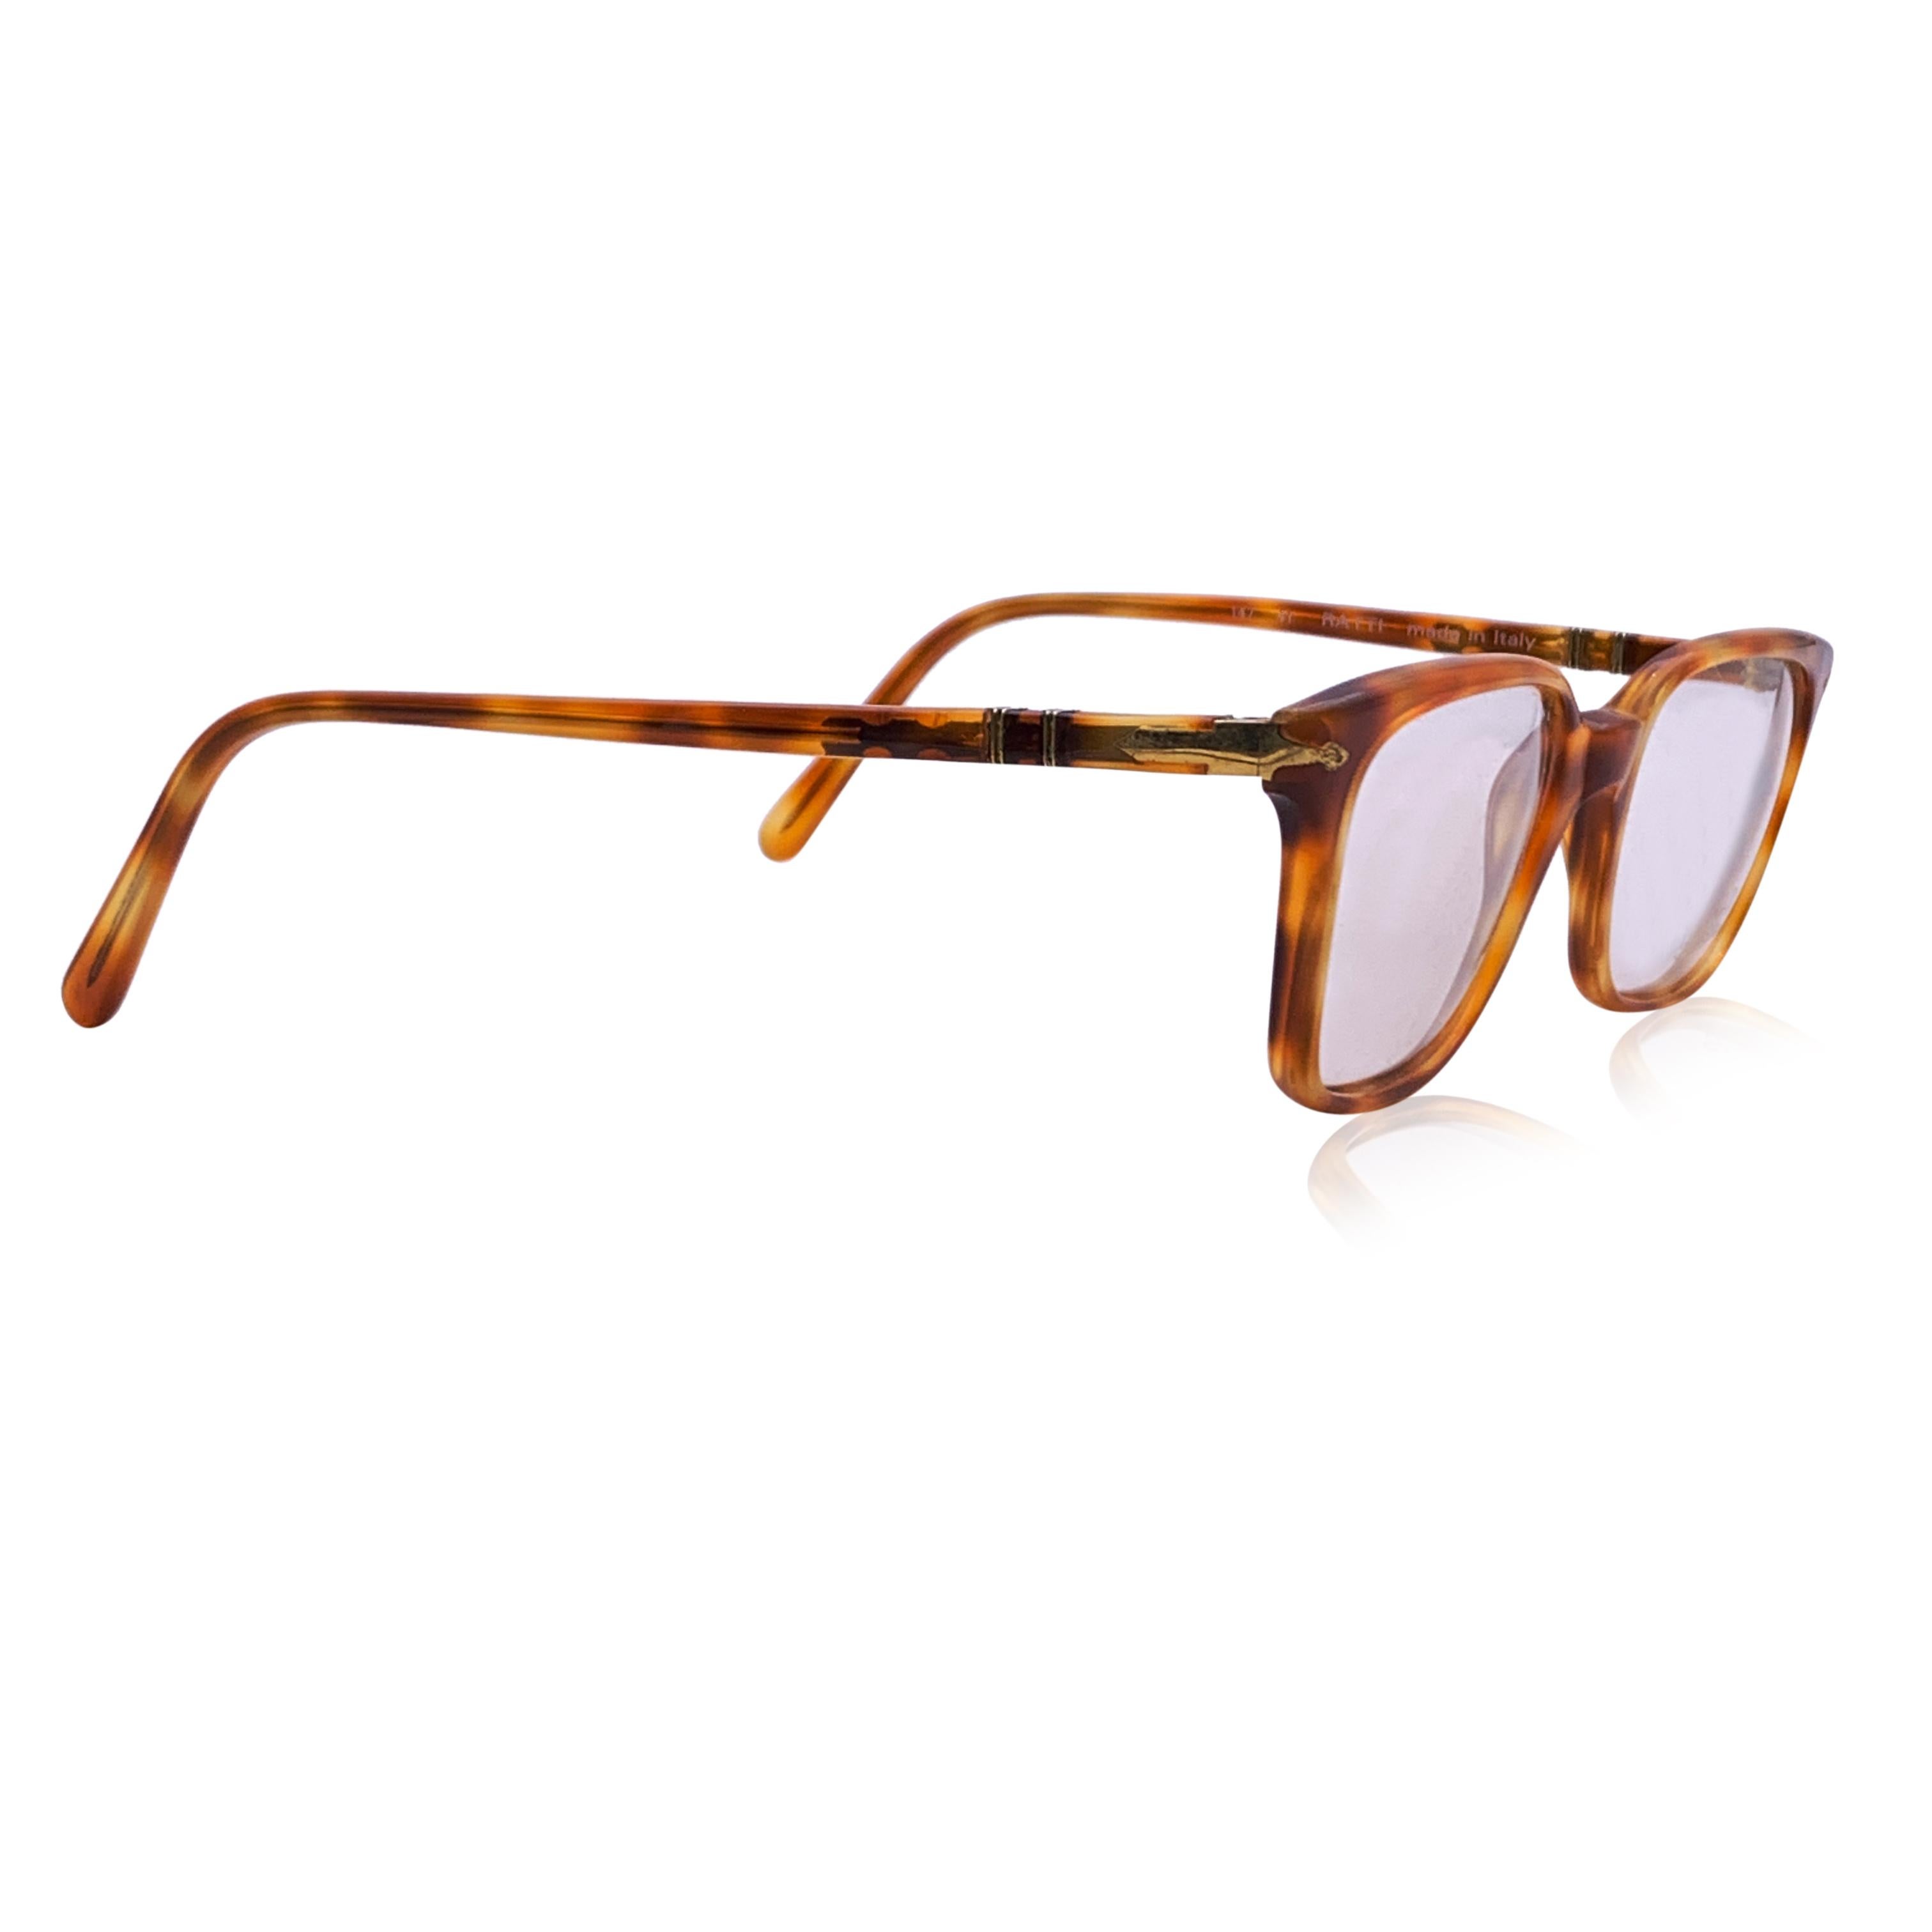 PERSOL Meflecto Ratti Vintage Eyeglasses- Model: 302. Brown acetate frame. Clear demo lenses. Flexible temples. Made in Italy. Style & Refs: 302 - 50-70

Details

MATERIAL: Acetate

COLOR: Brown

MODEL: 302

GENDER: Women

COUNTRY OF MANUFACTURE: